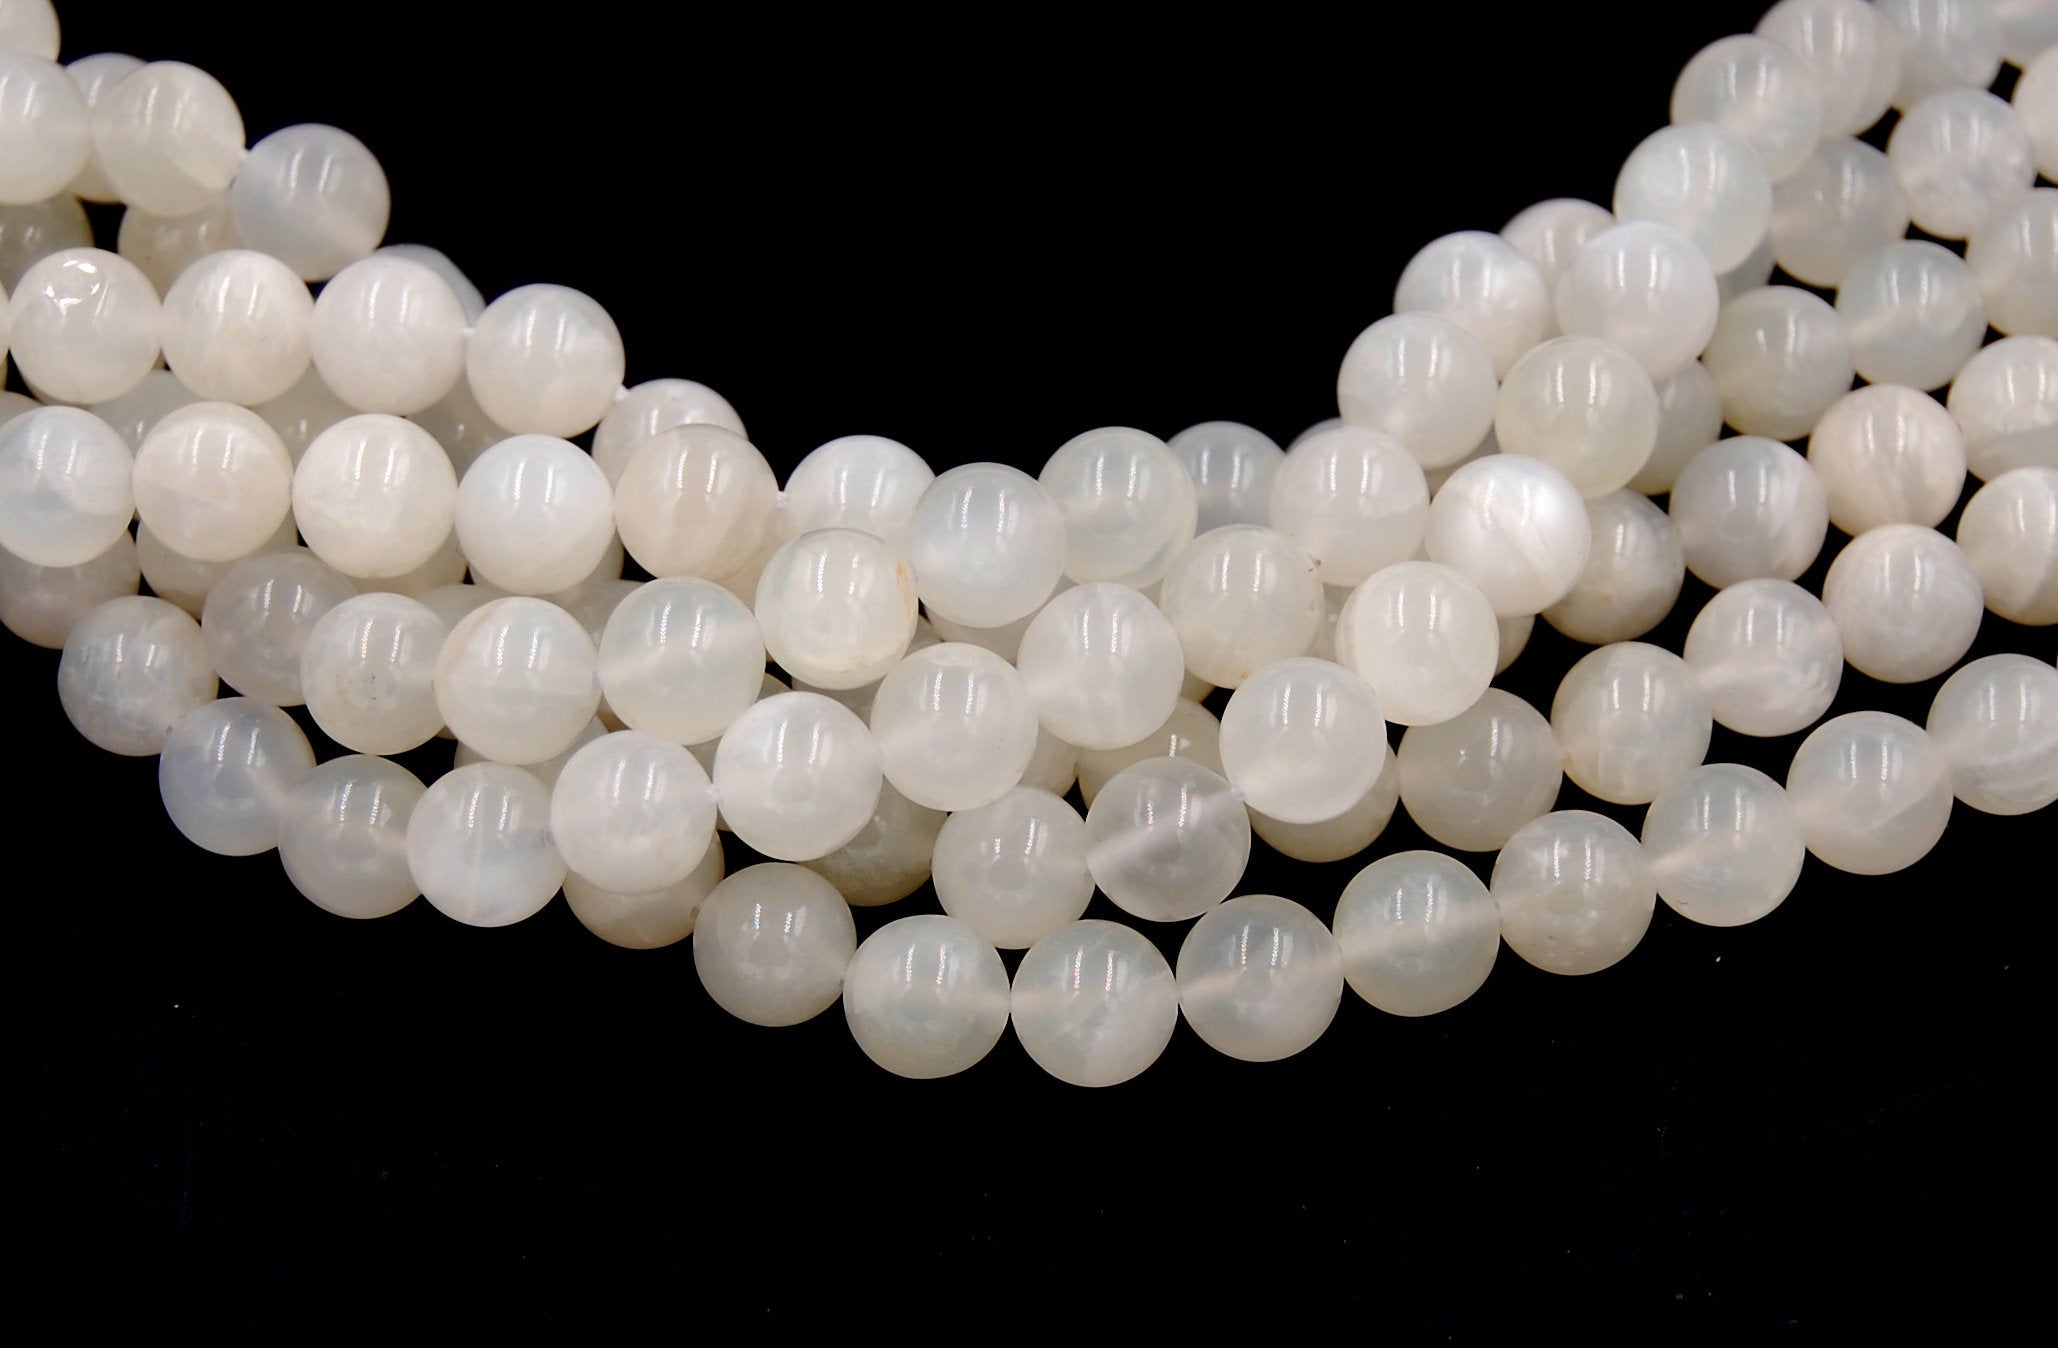 White Moonstone Natural Beads Strands, Round, 4mm -15.75 inch strand